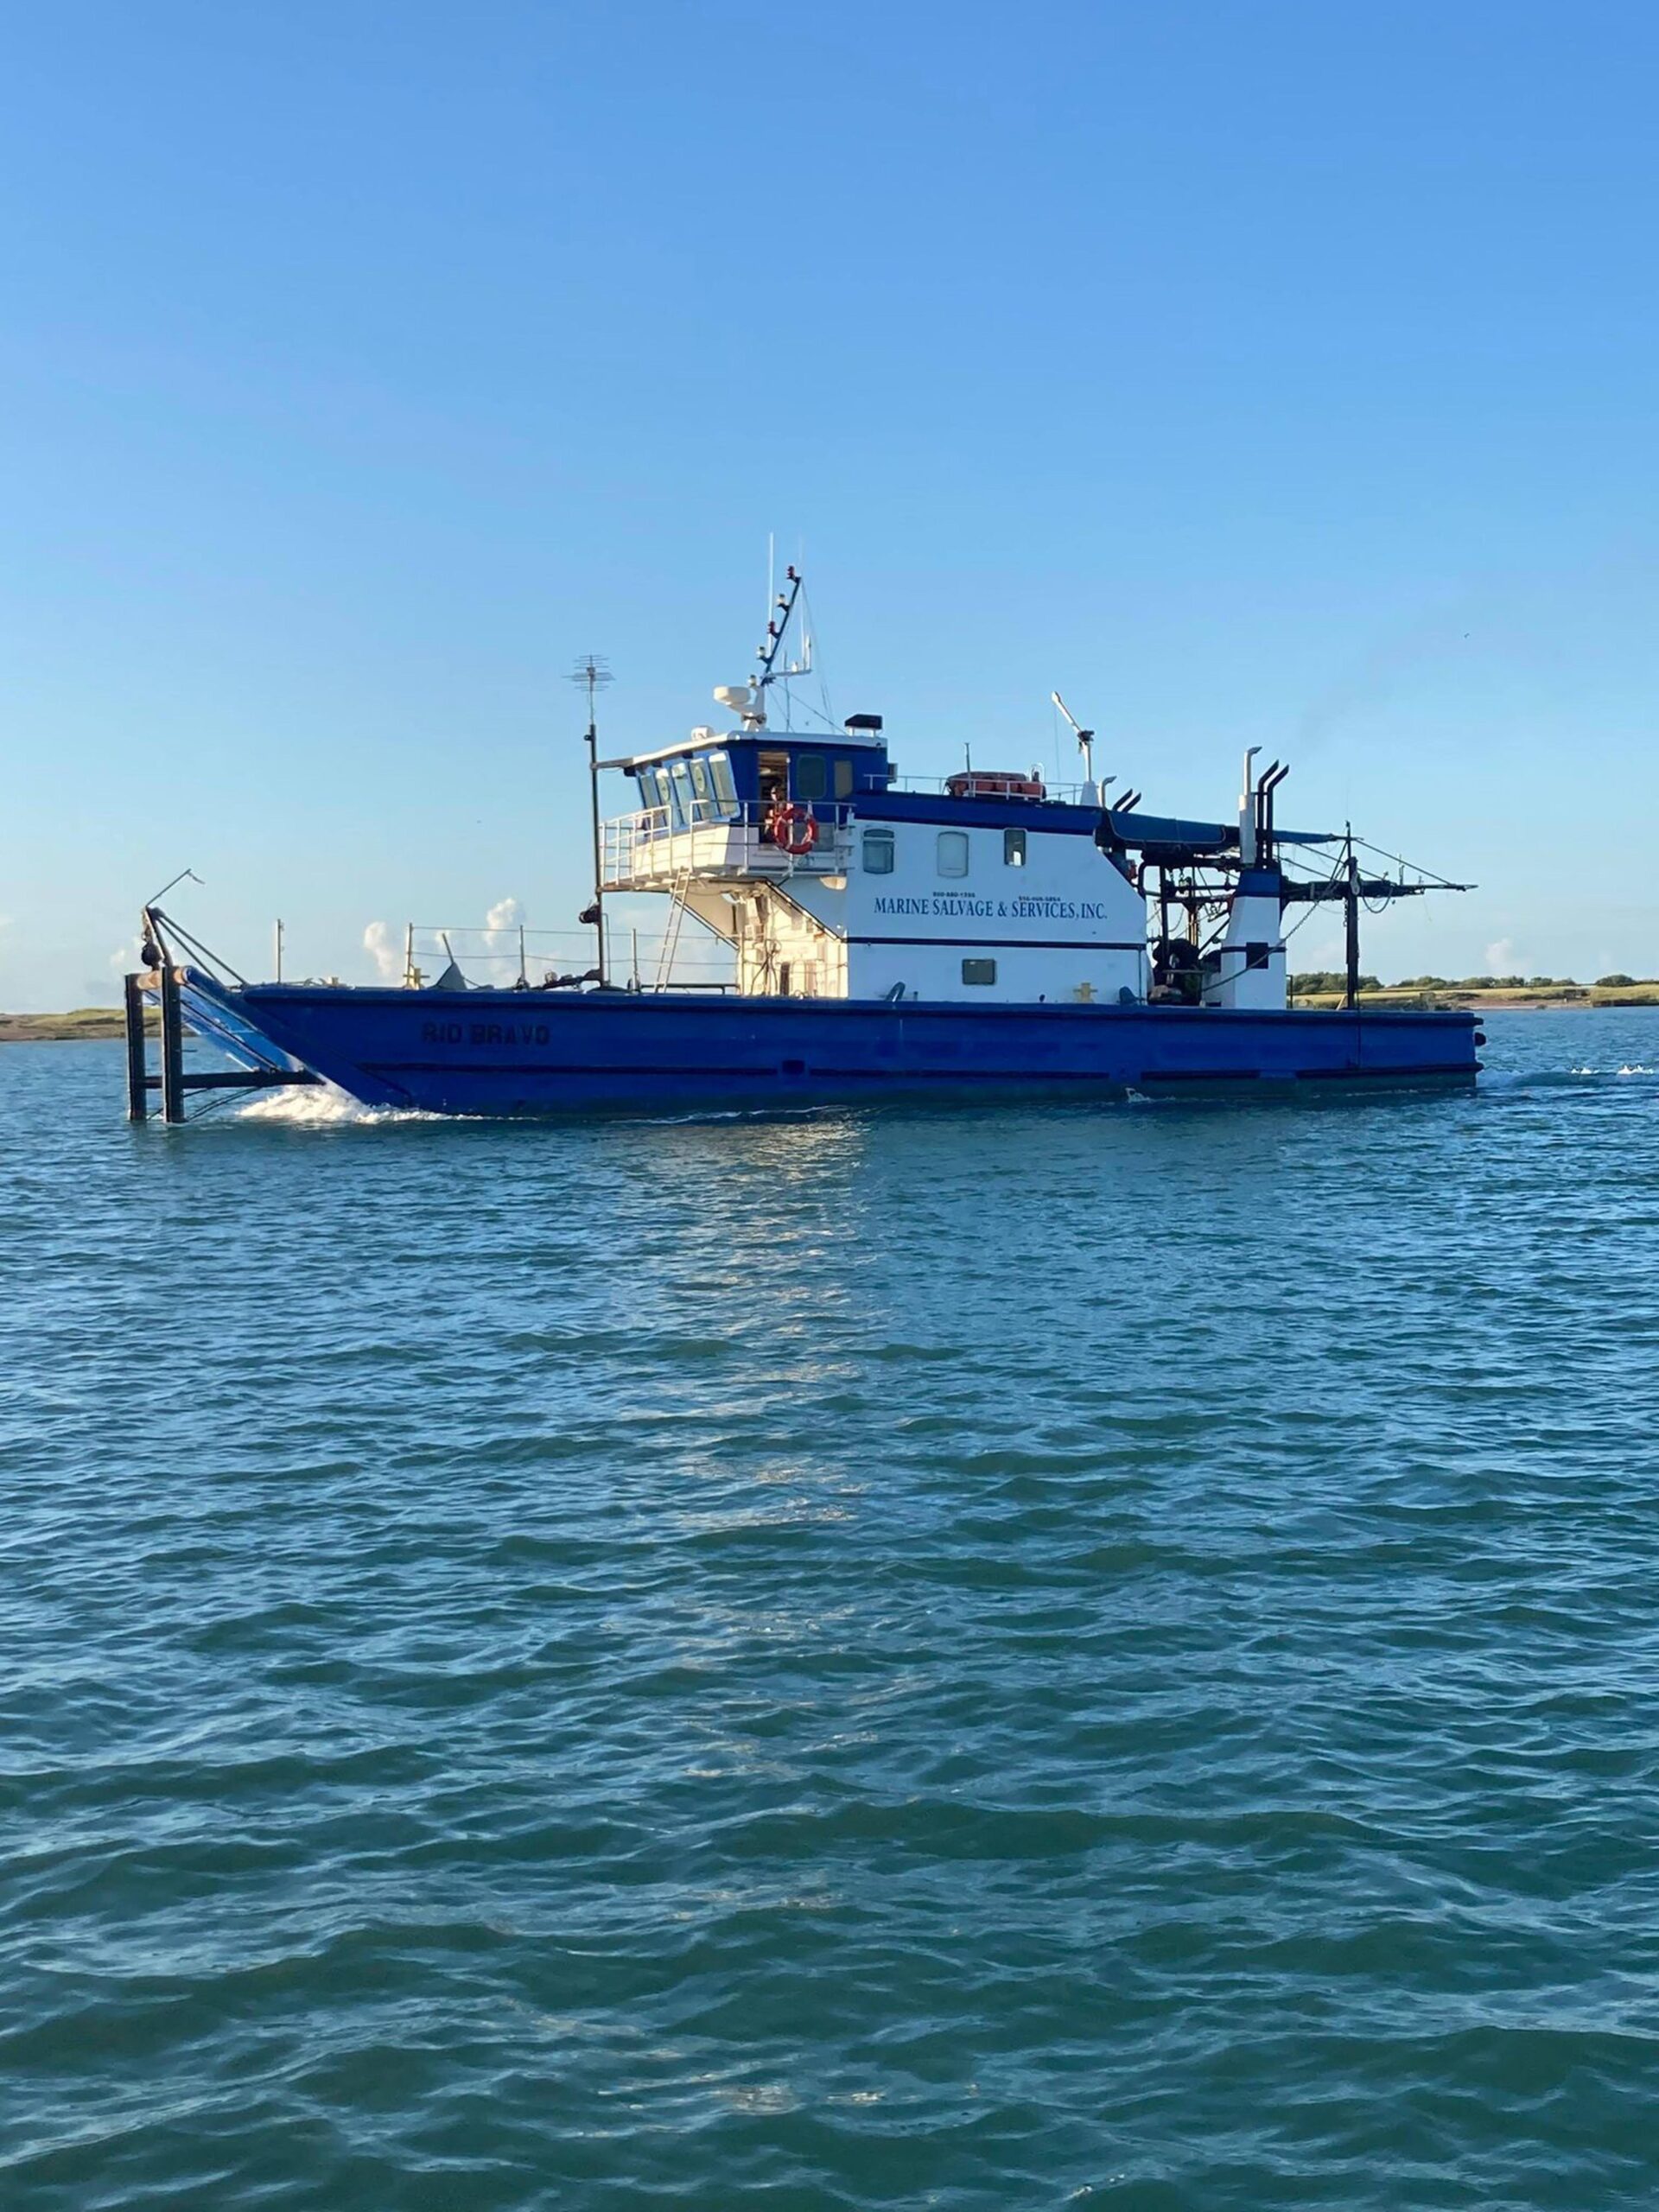 On Tuesday, Friends of RGV Reef sank three large, retired ships named the SPI Ceviche, Andy Fasken and Billy Kenon about 12 miles north of the South Padre Island jetties. The sinking of ships for the RGV Reef project is described by participants as a long process that involves a series of steps from obtaining boats to cleaning them and making them properly sink upright. (Courtesy photo)